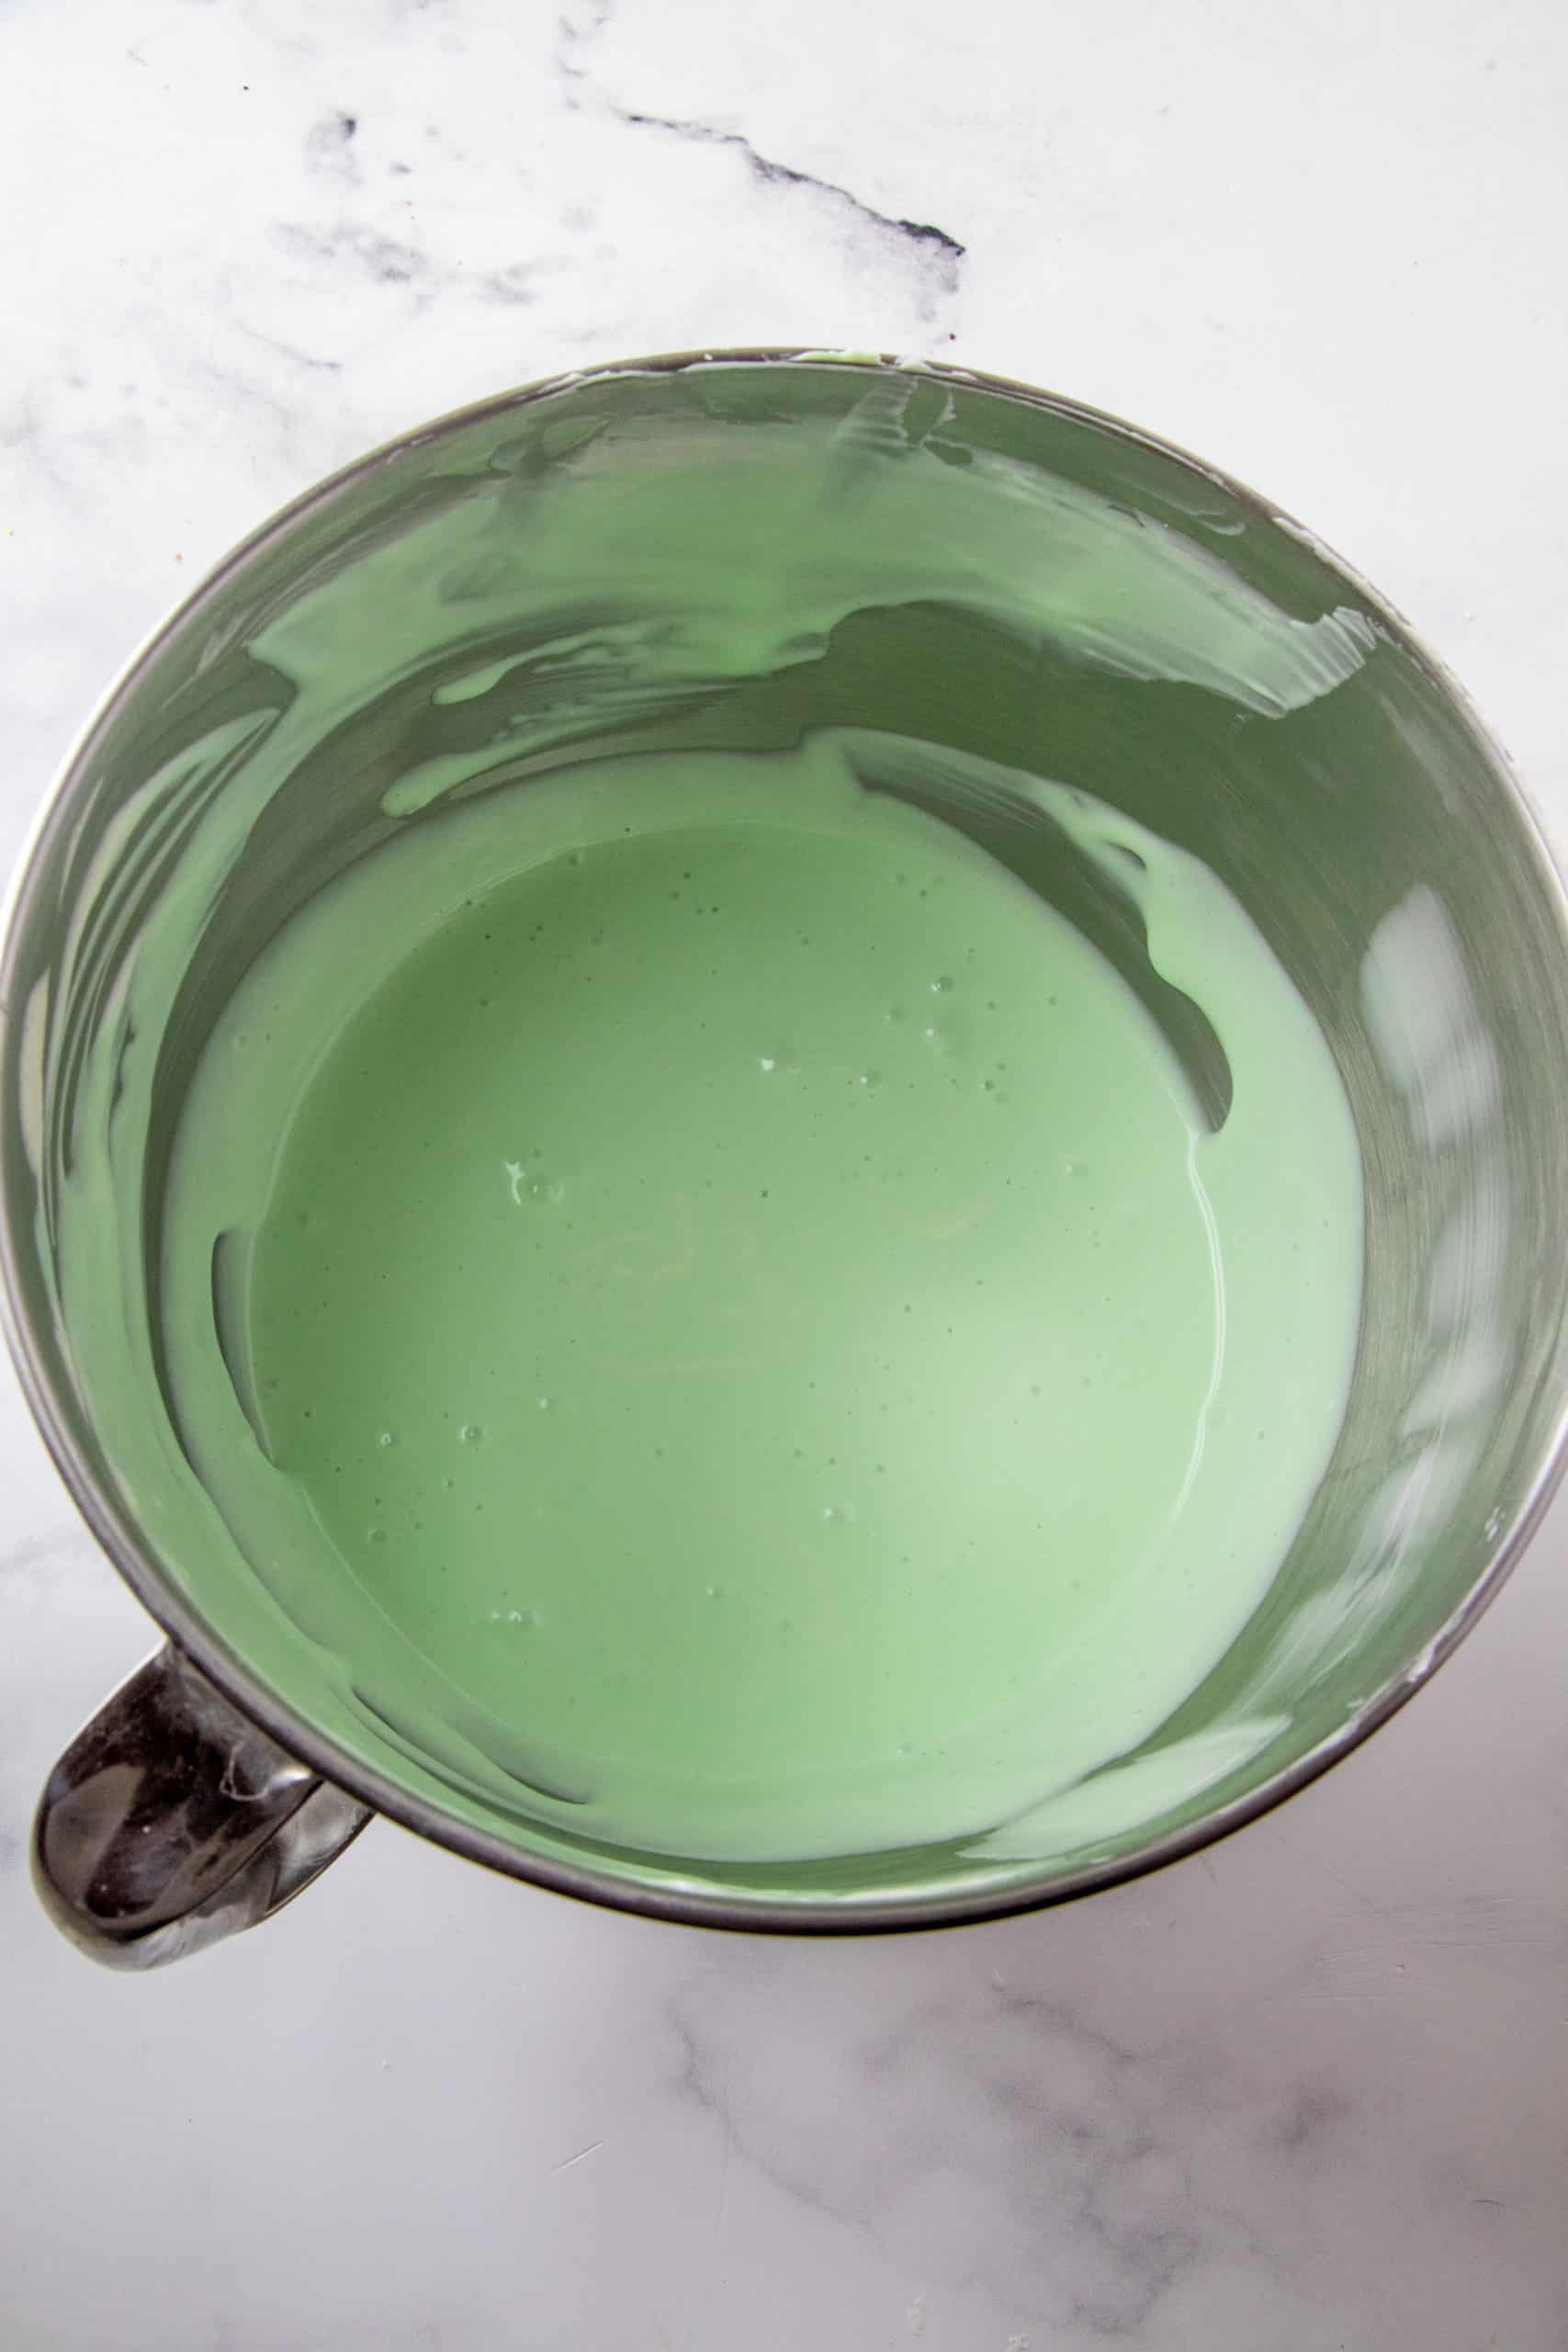 Green cheesecake batter mixture in the bowl of a stand mixer.